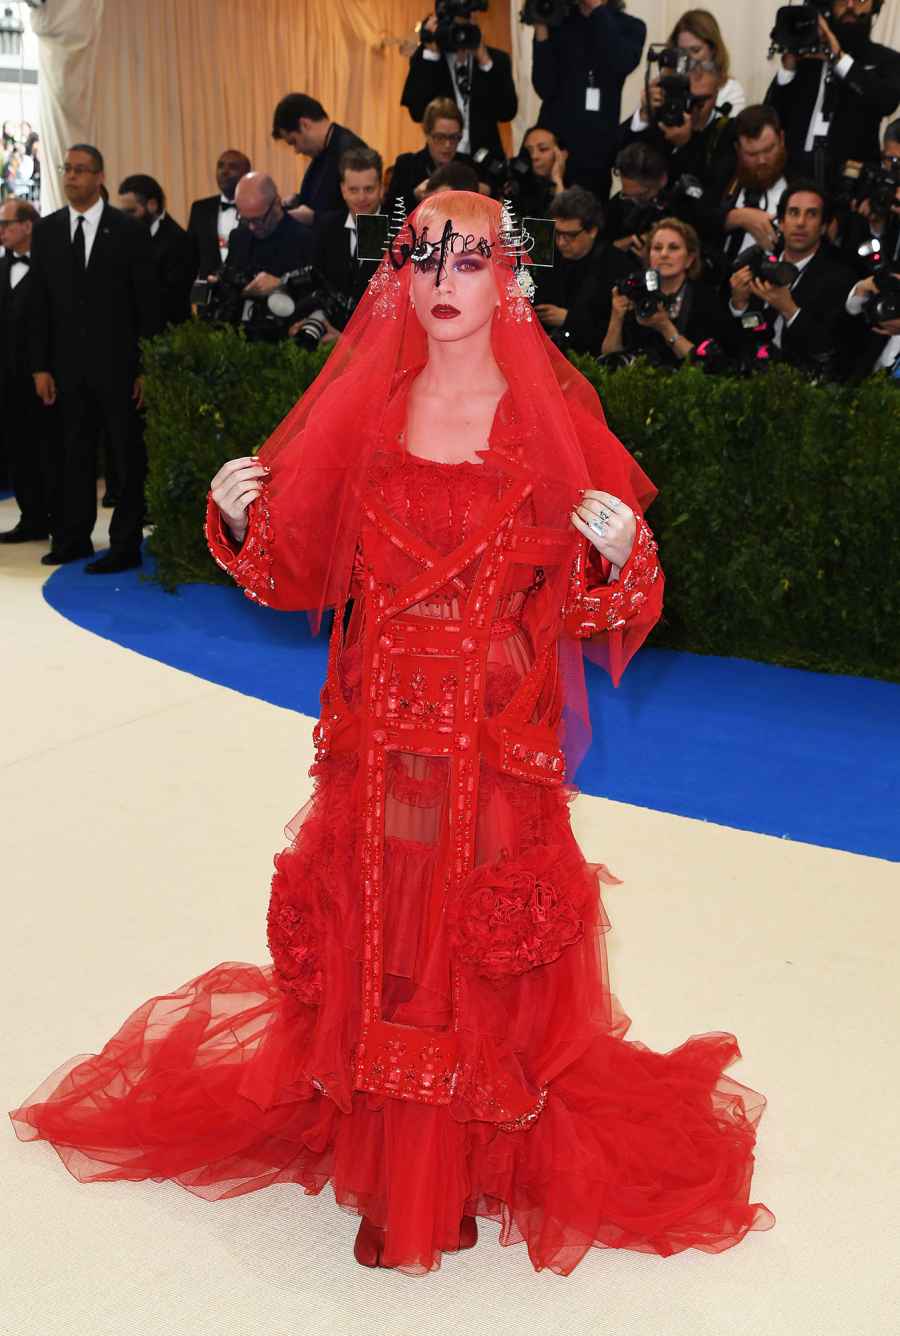 Katy Perry Wore Some of Her Wackiest Outfits Ever to the 2019 Met Gala